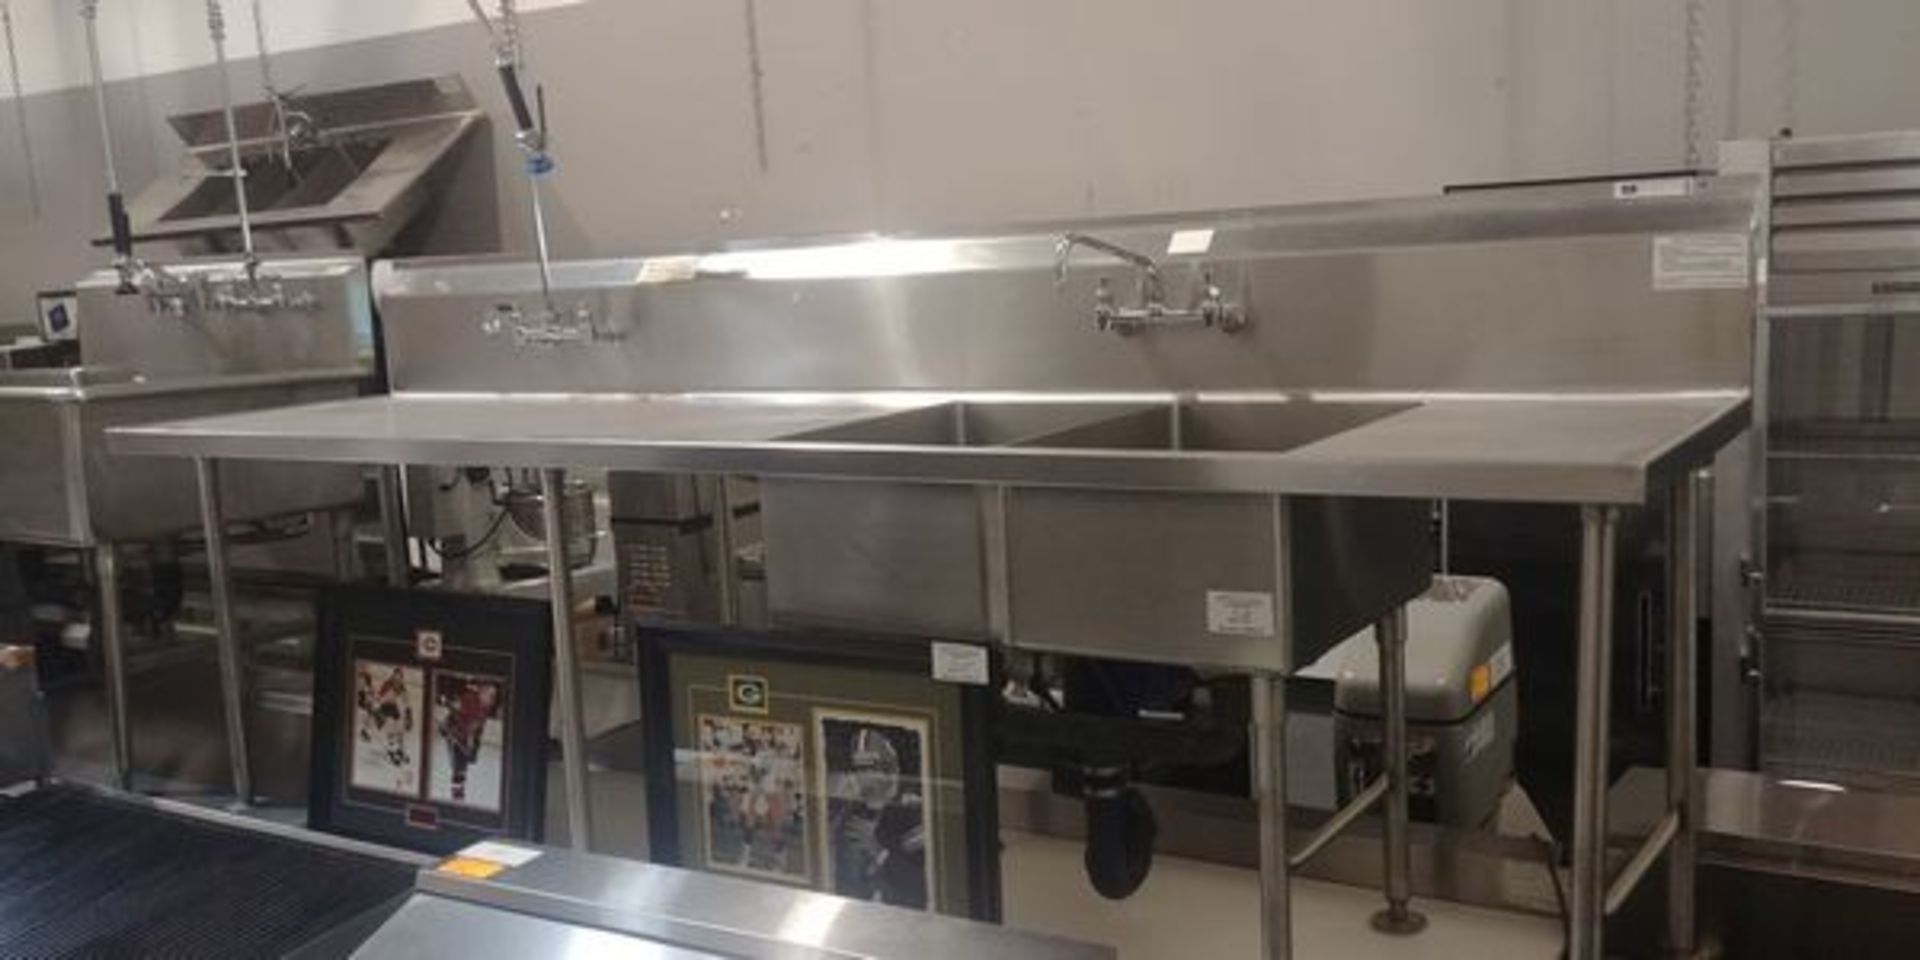 Load King Approx. 10 Ft Stainless Steel Counter with 2 Compartment Sink and Wash Wand Set - New